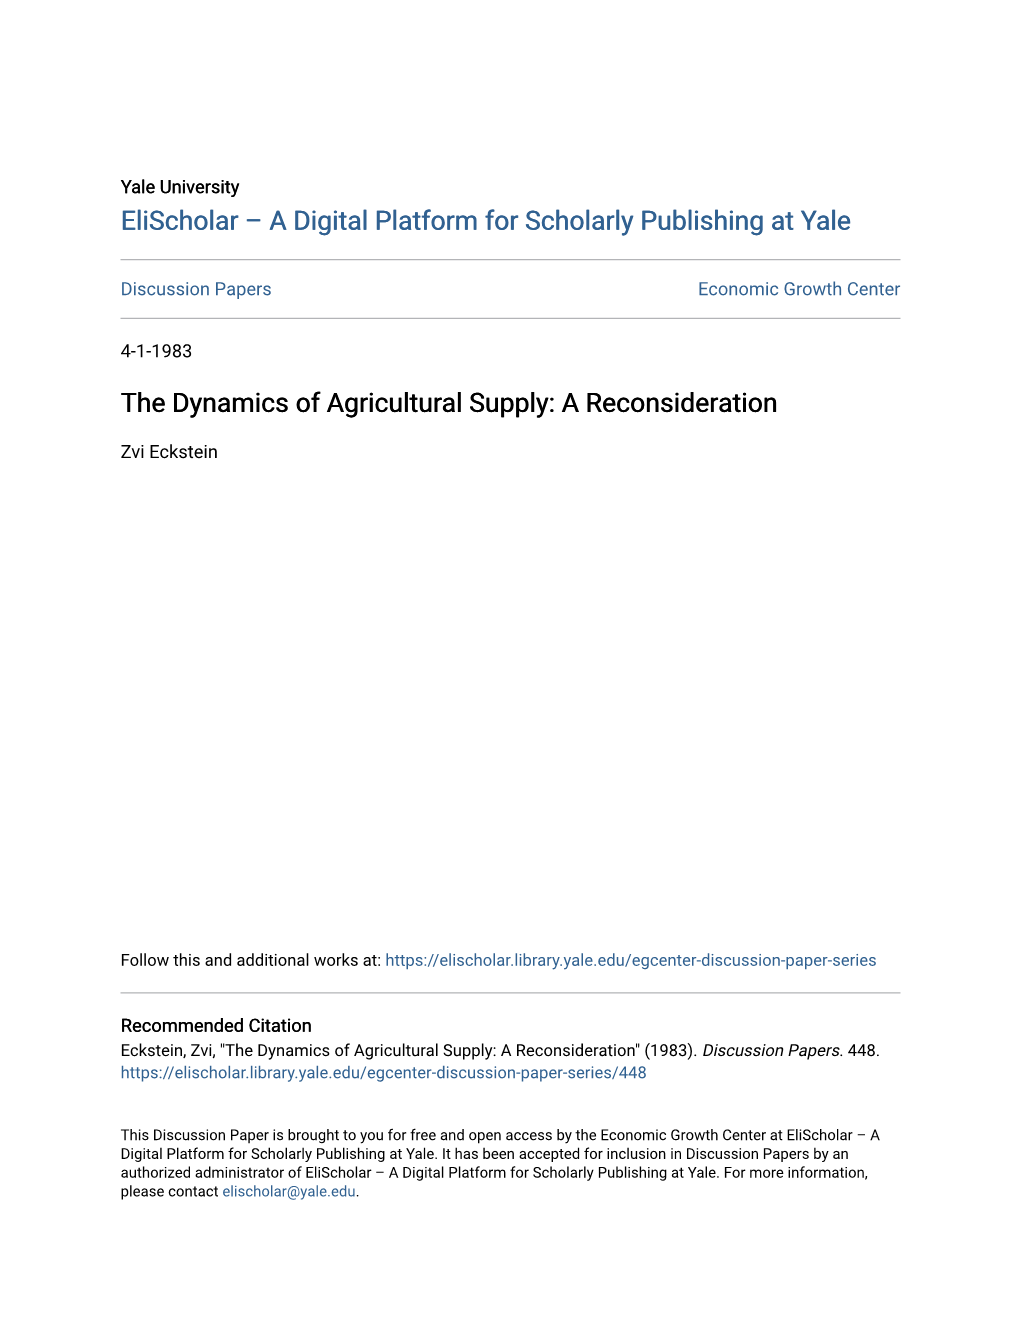 The Dynamics of Agricultural Supply: a Reconsideration